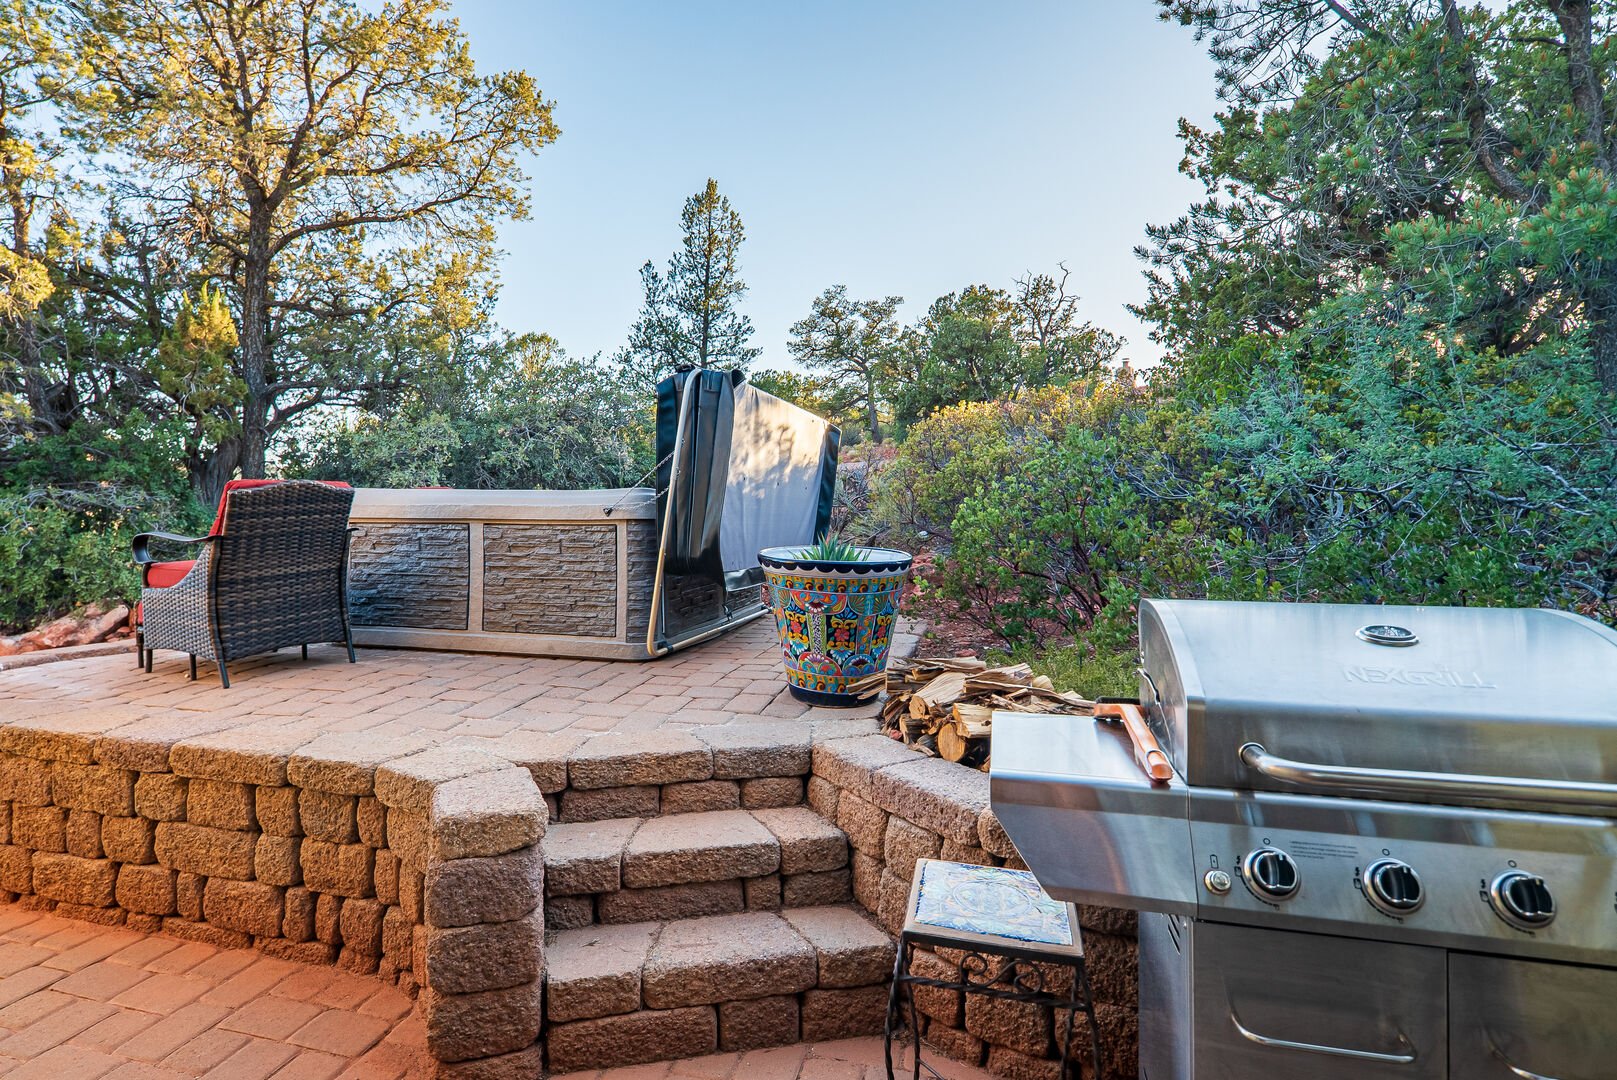 Grill Area w/ Hot Tub in Background